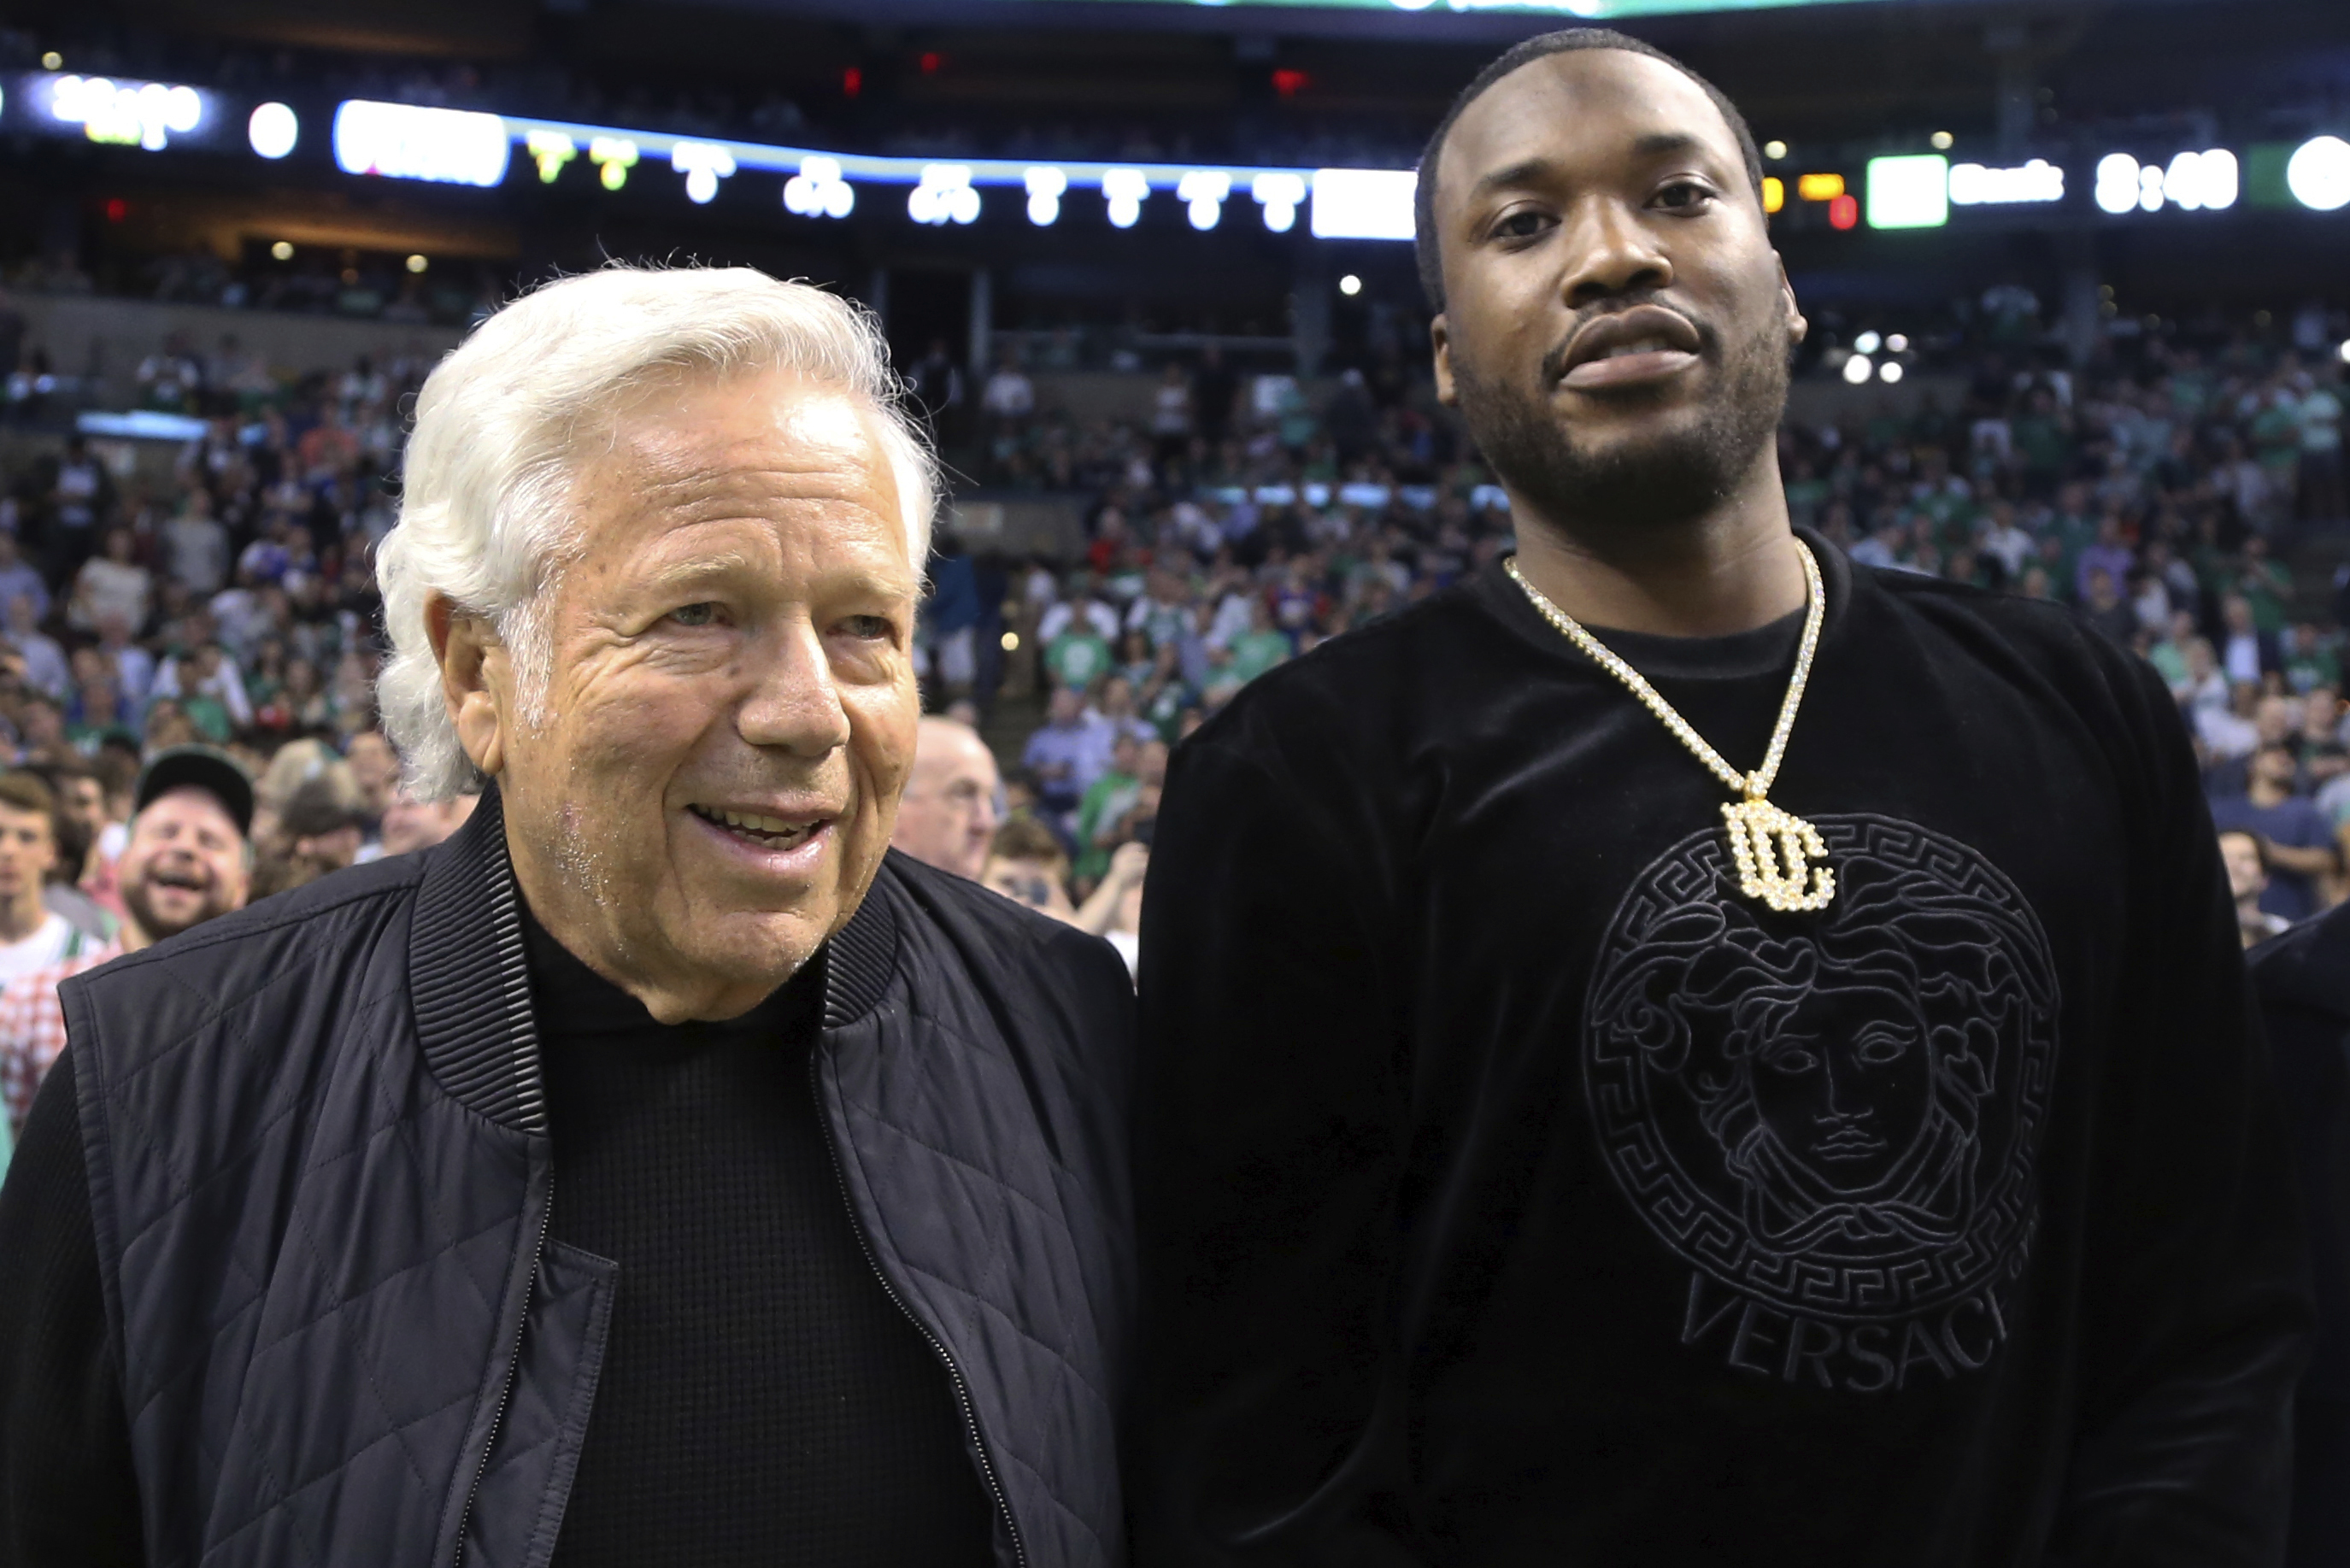 Meek Mill & REFORM Alliance Gifts Kids NBA Store Spree, Pats Game Visit